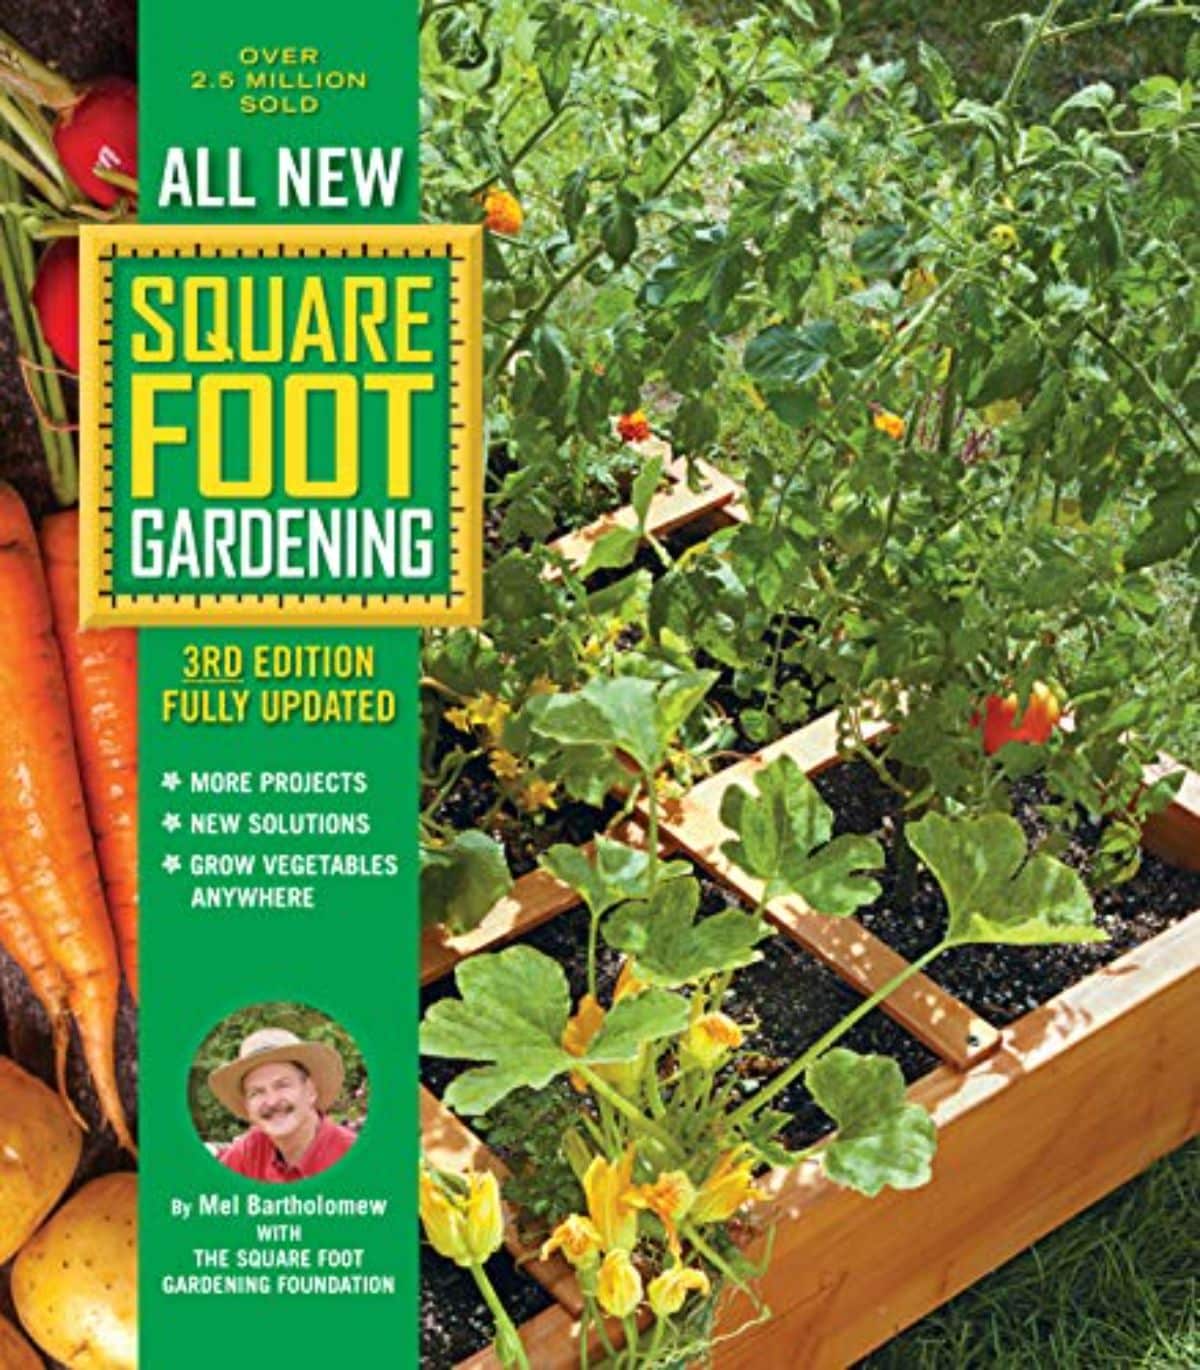 Picture of book cover for the All New Square Foot Gardening 3rd edition by Mel Bartholomew